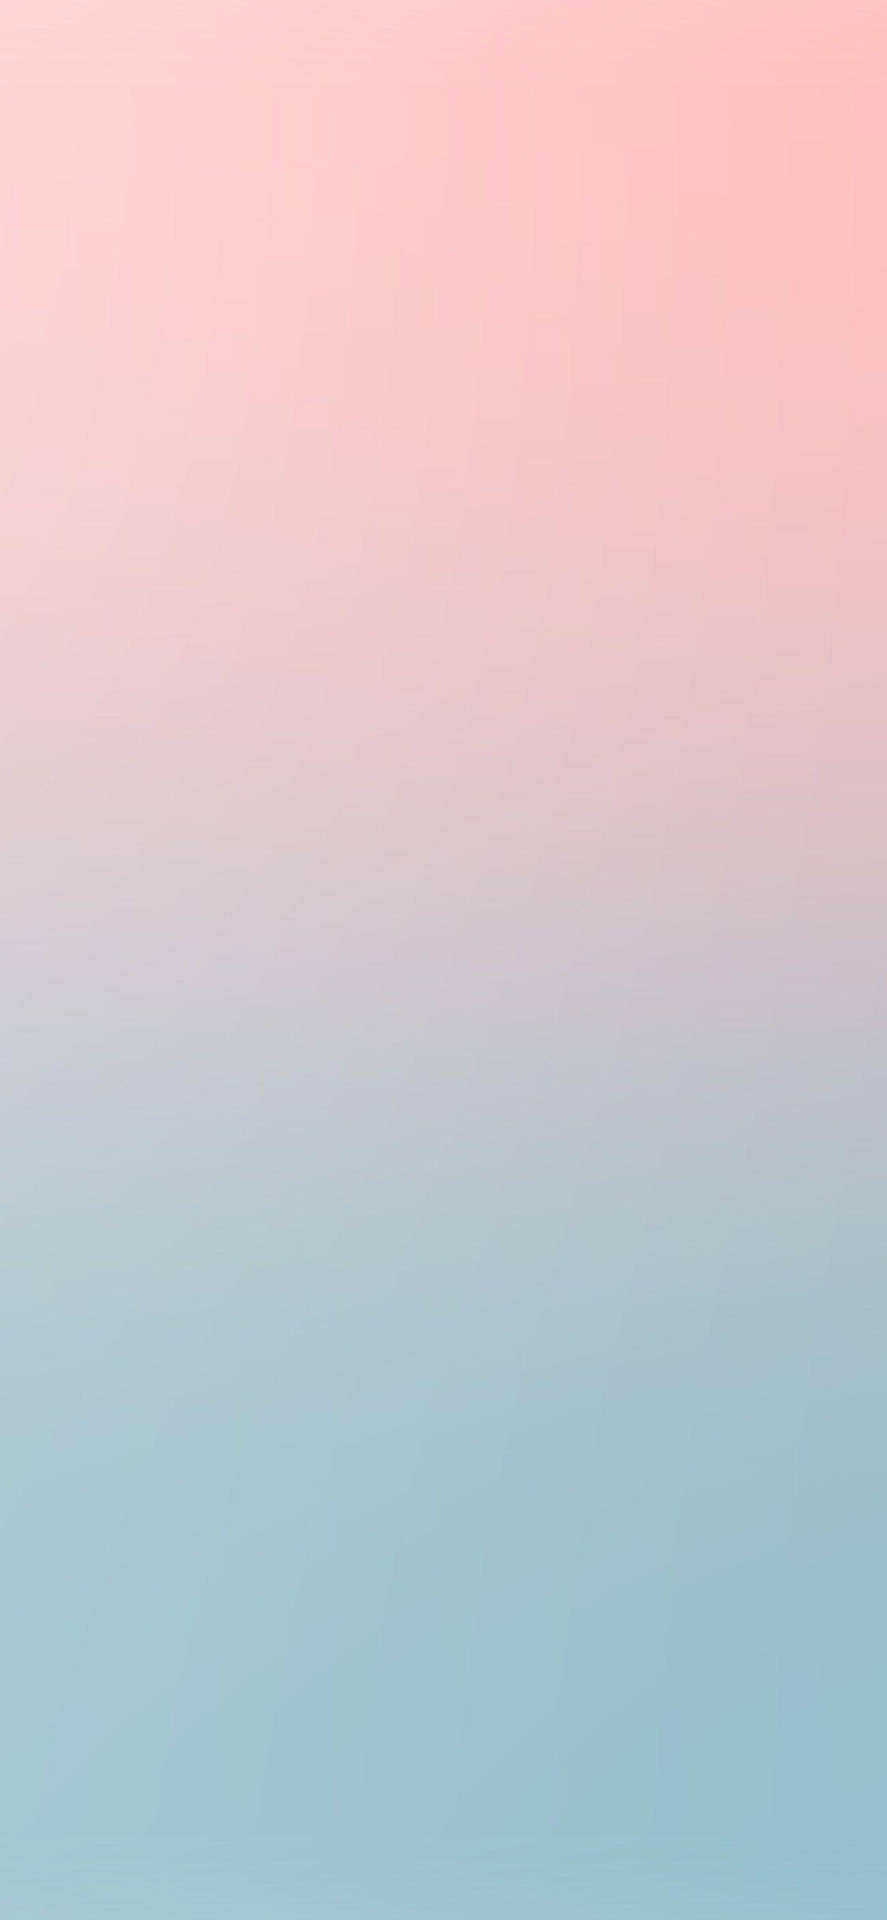 100+] Pastel Iphone Background s for FREE 